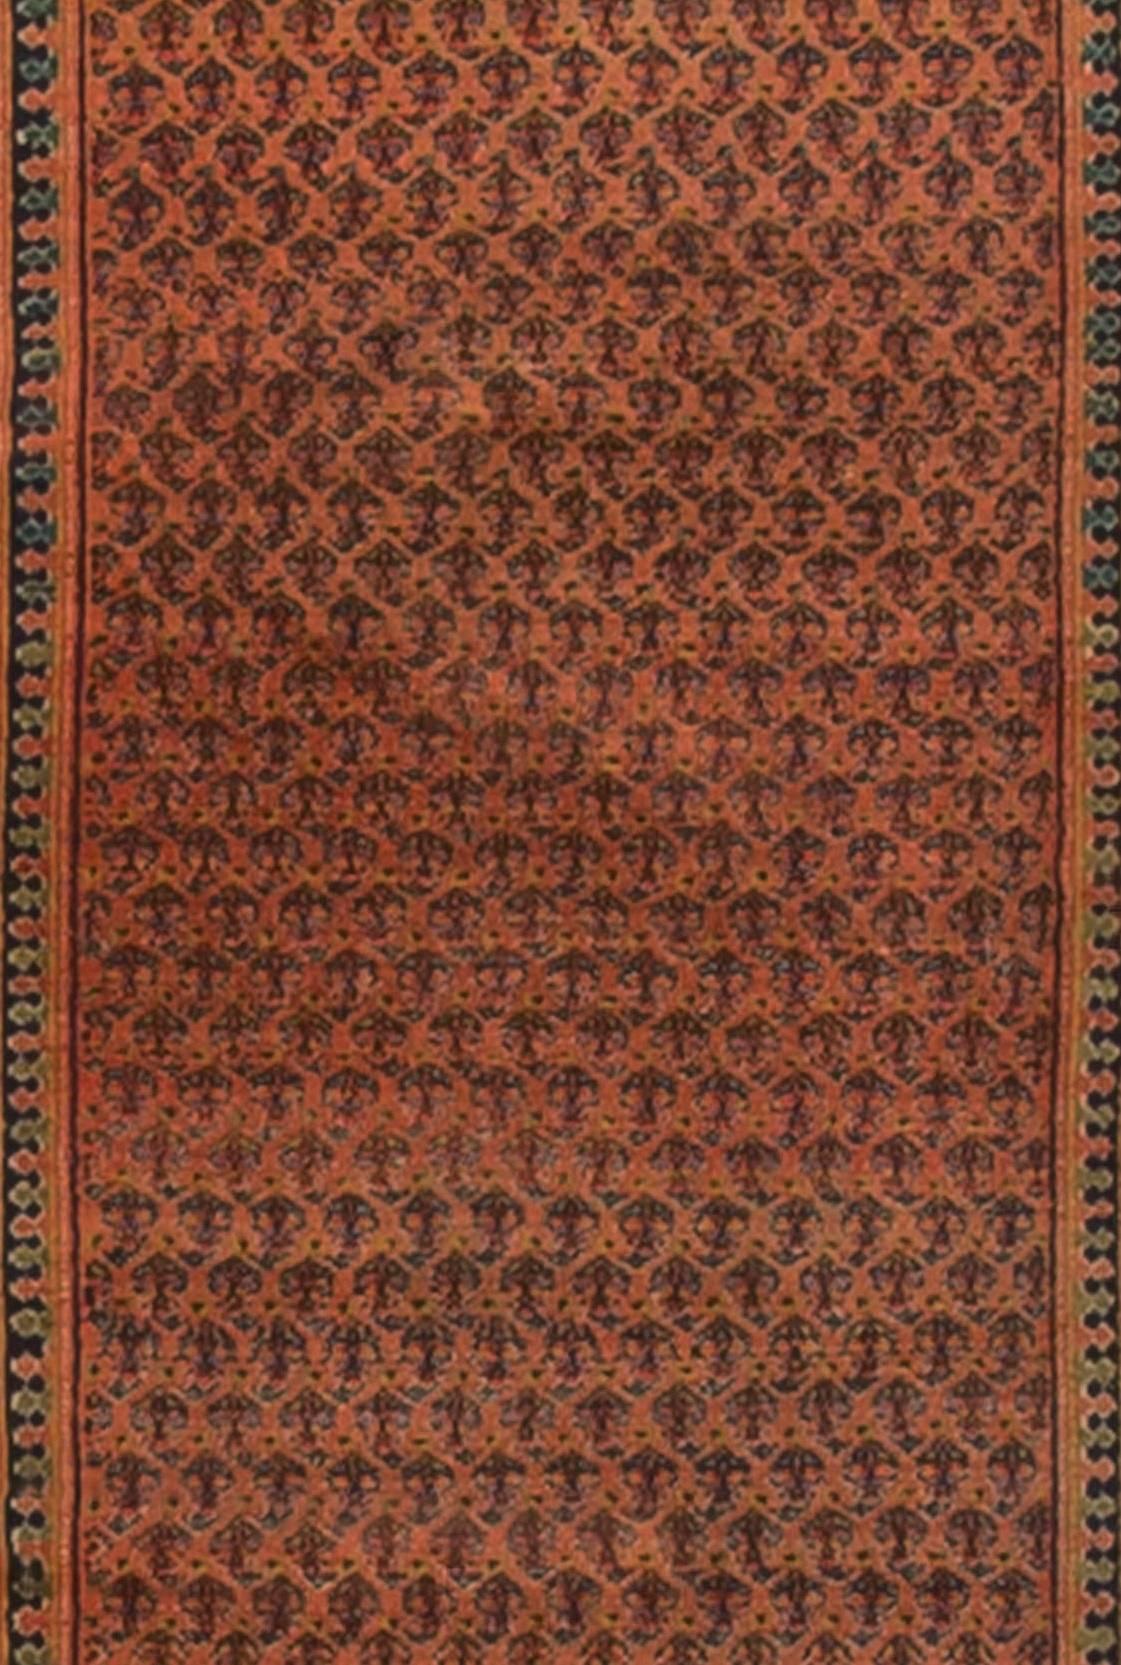 A vintage Persian handwoven Seraband runner, circa 1920. The main field filled to overflowing with a paisley design on a soft red ground and surrounded by multiple guard borders. In a dark color on a lighter filed.
 